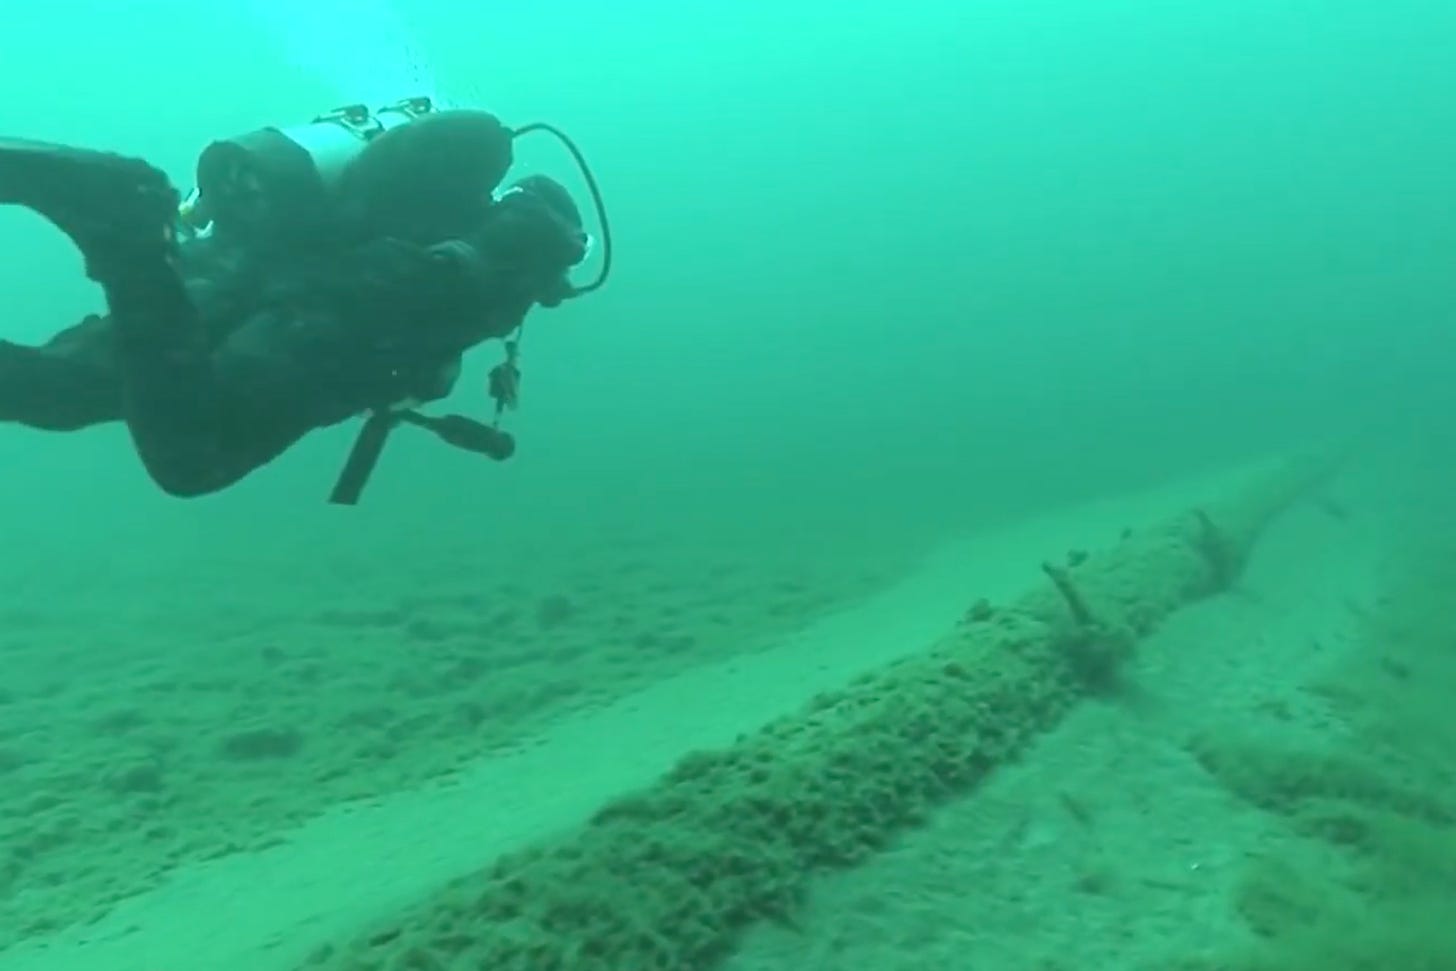 A National Wildlife Federation diver inspects Enbridge’s Line 5 pipeline at the bottom of the Straits of Mackinac. Credit: National Wildlife Federation video screenshot